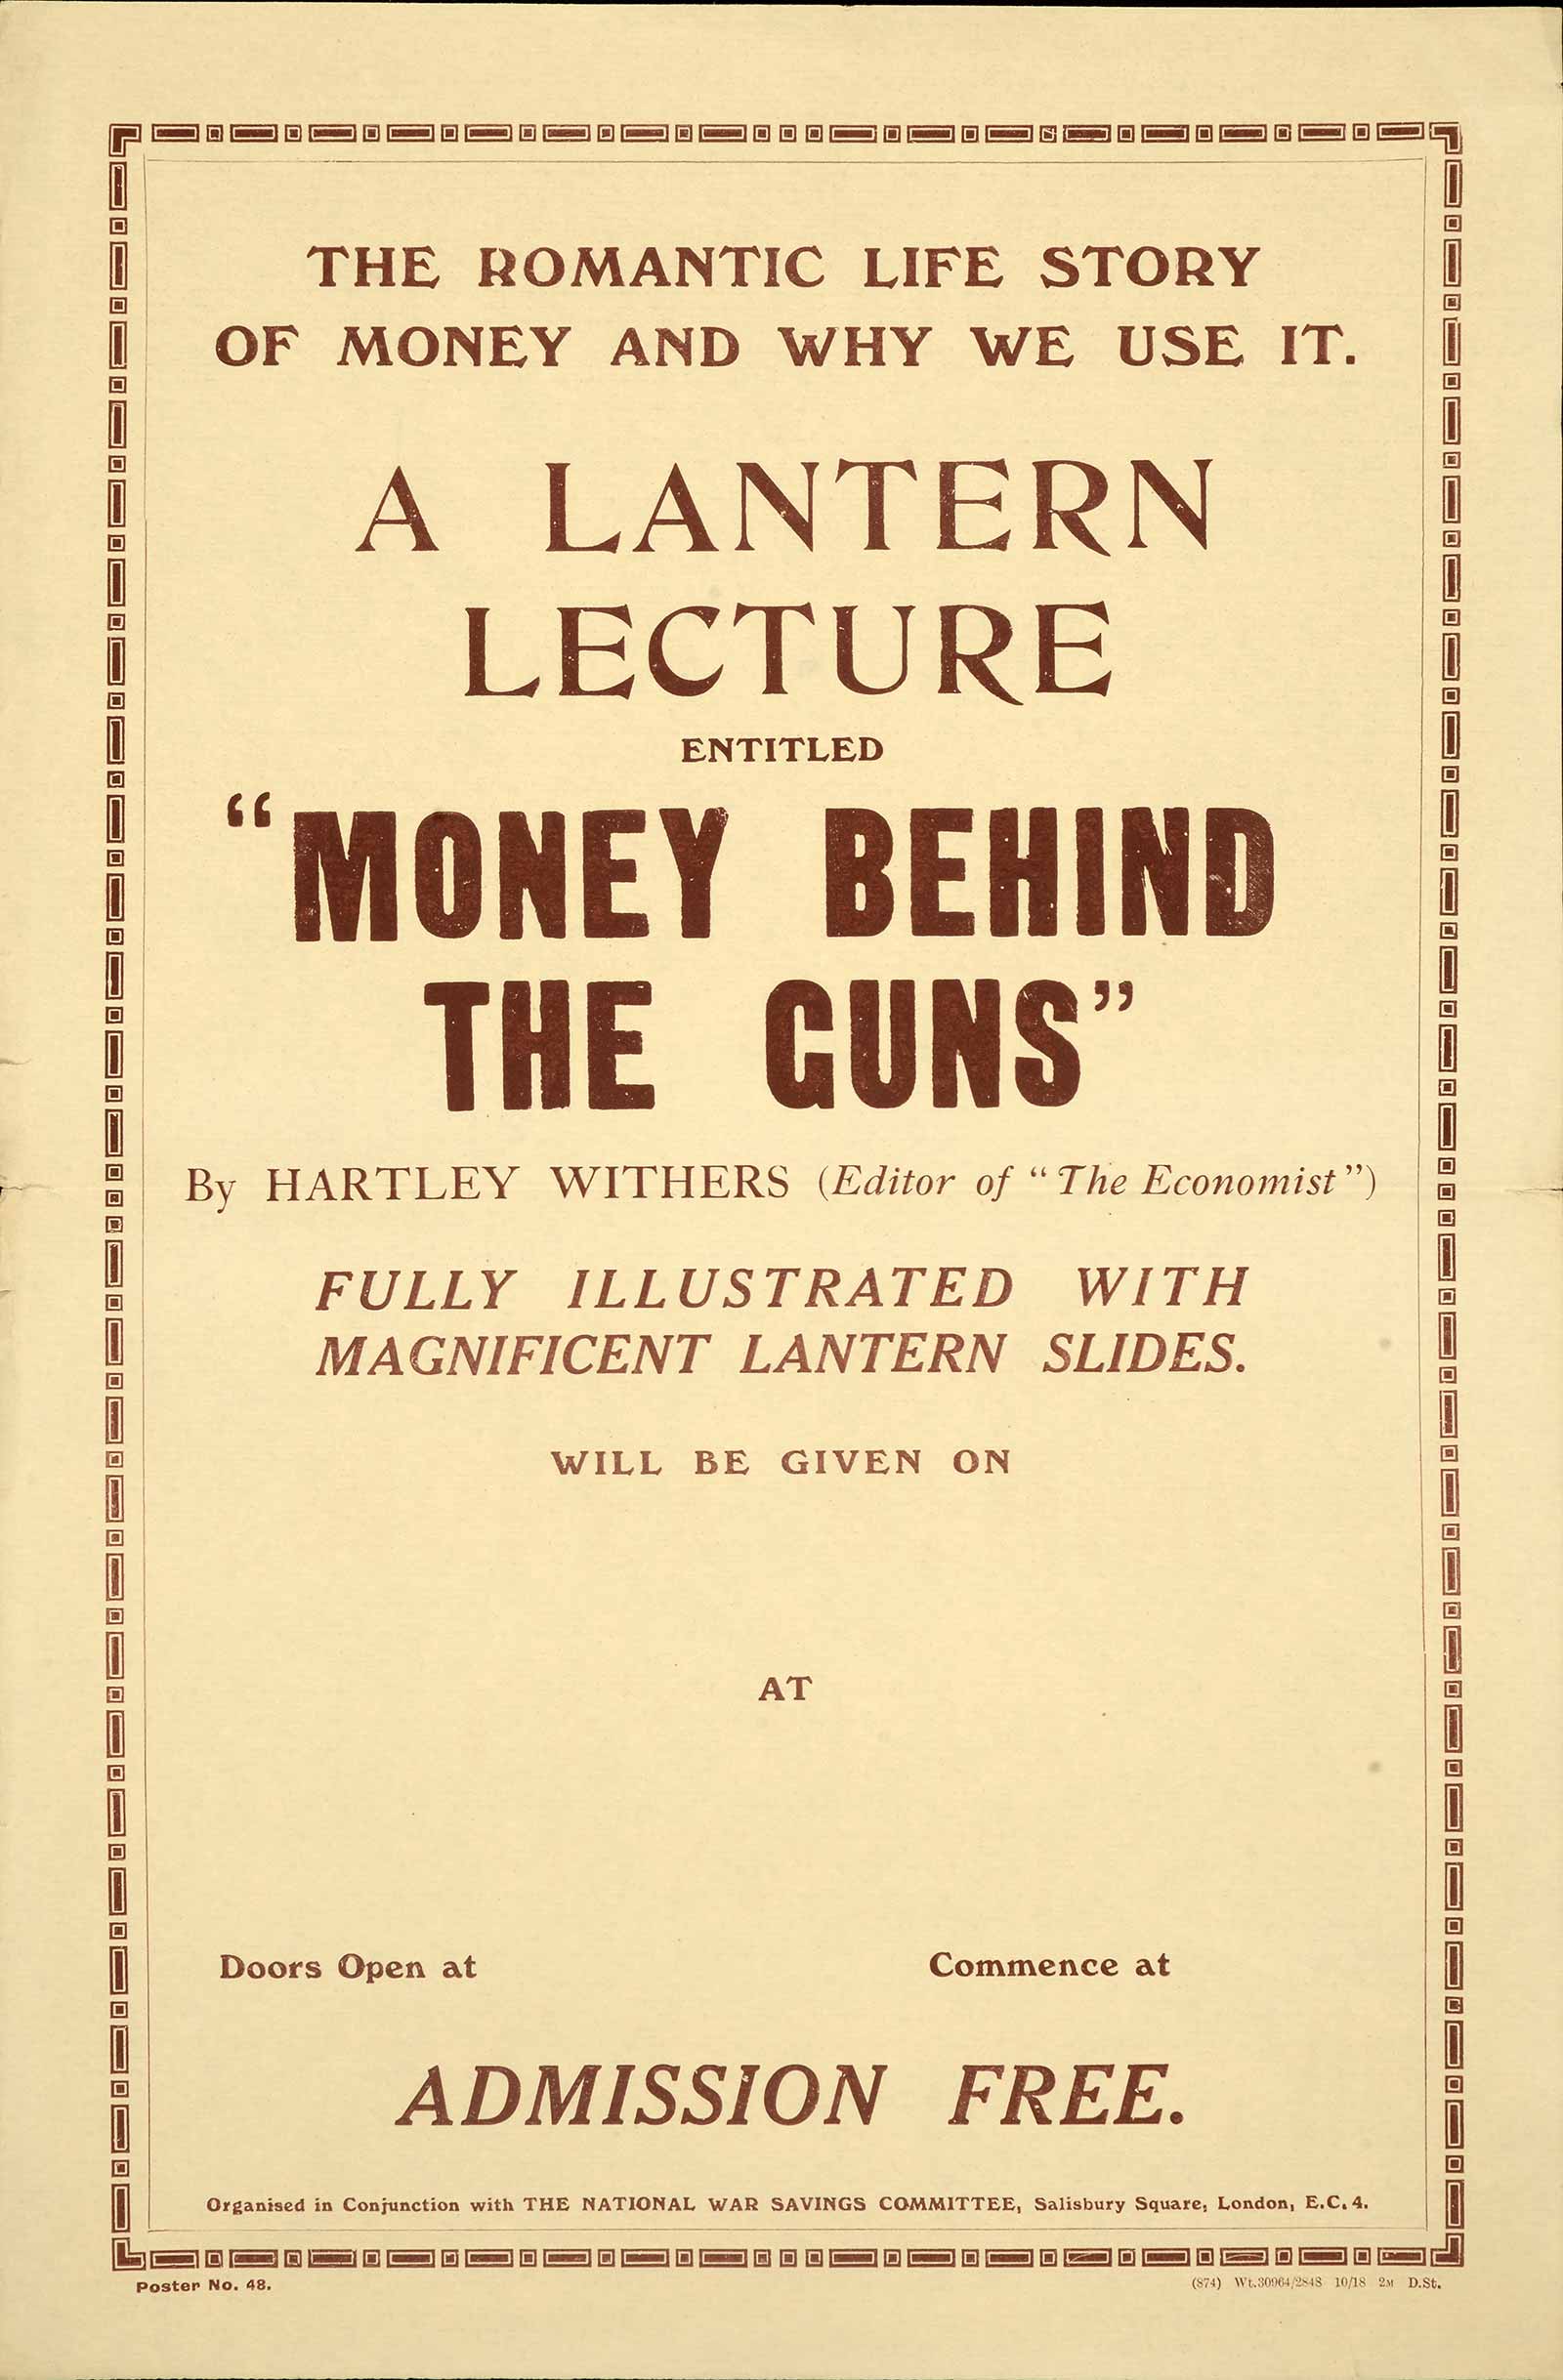 Image of poster advertising a lantern lecture called 'The Money Behind the Guns'